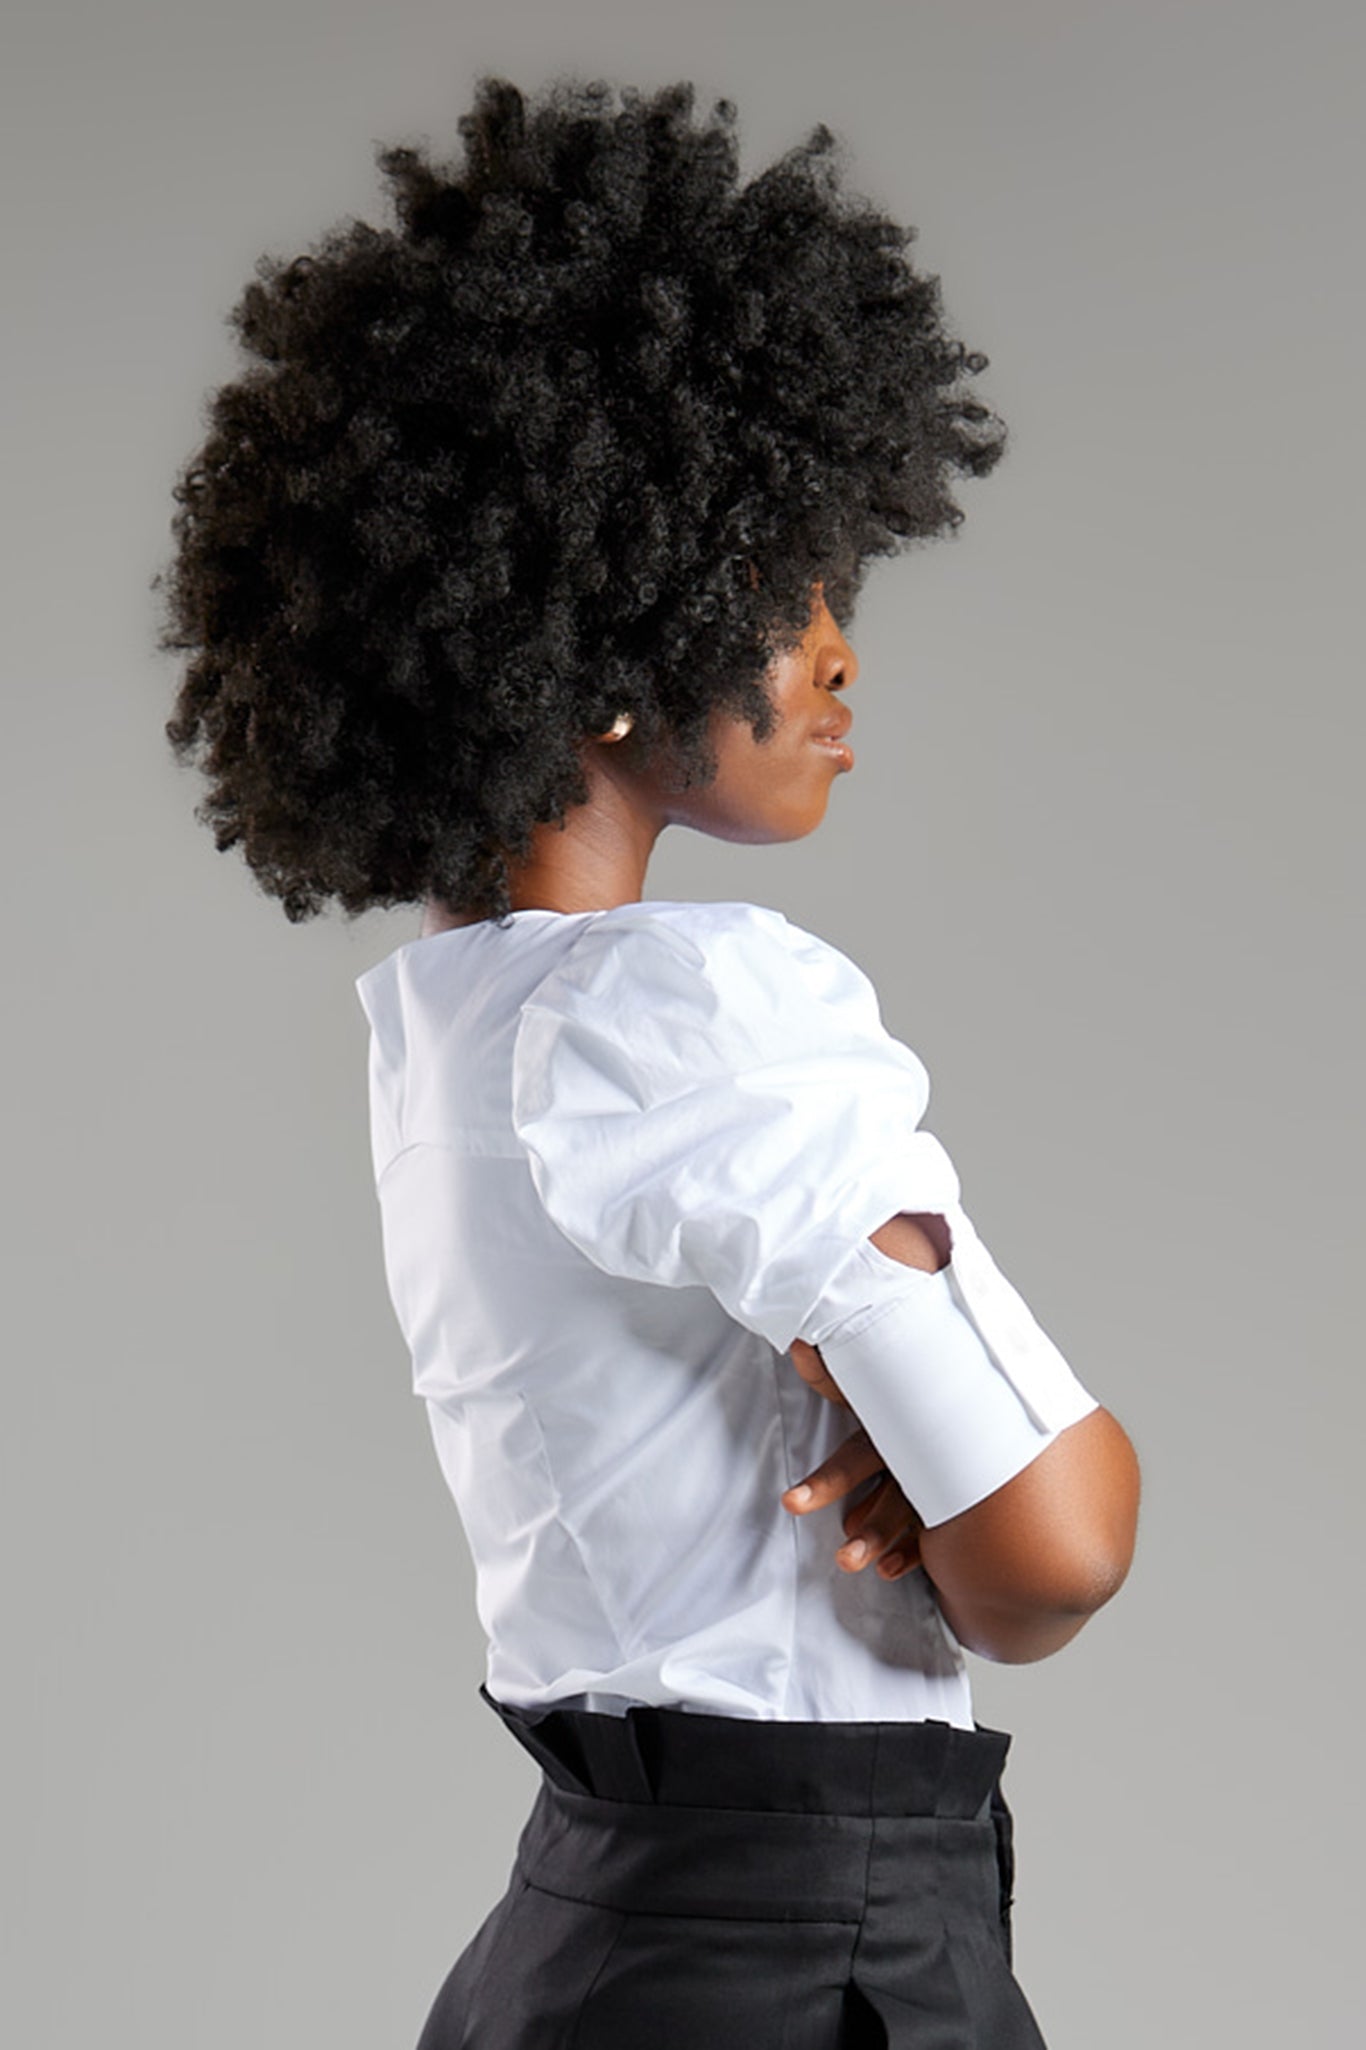 Seragyi's Martina Blouse in White, crafted from 100% eco-friendly cotton. Featuring an asymmetrical neckline and ruched sleeves, it's a versatile and elegant piece in Women's Clothing.